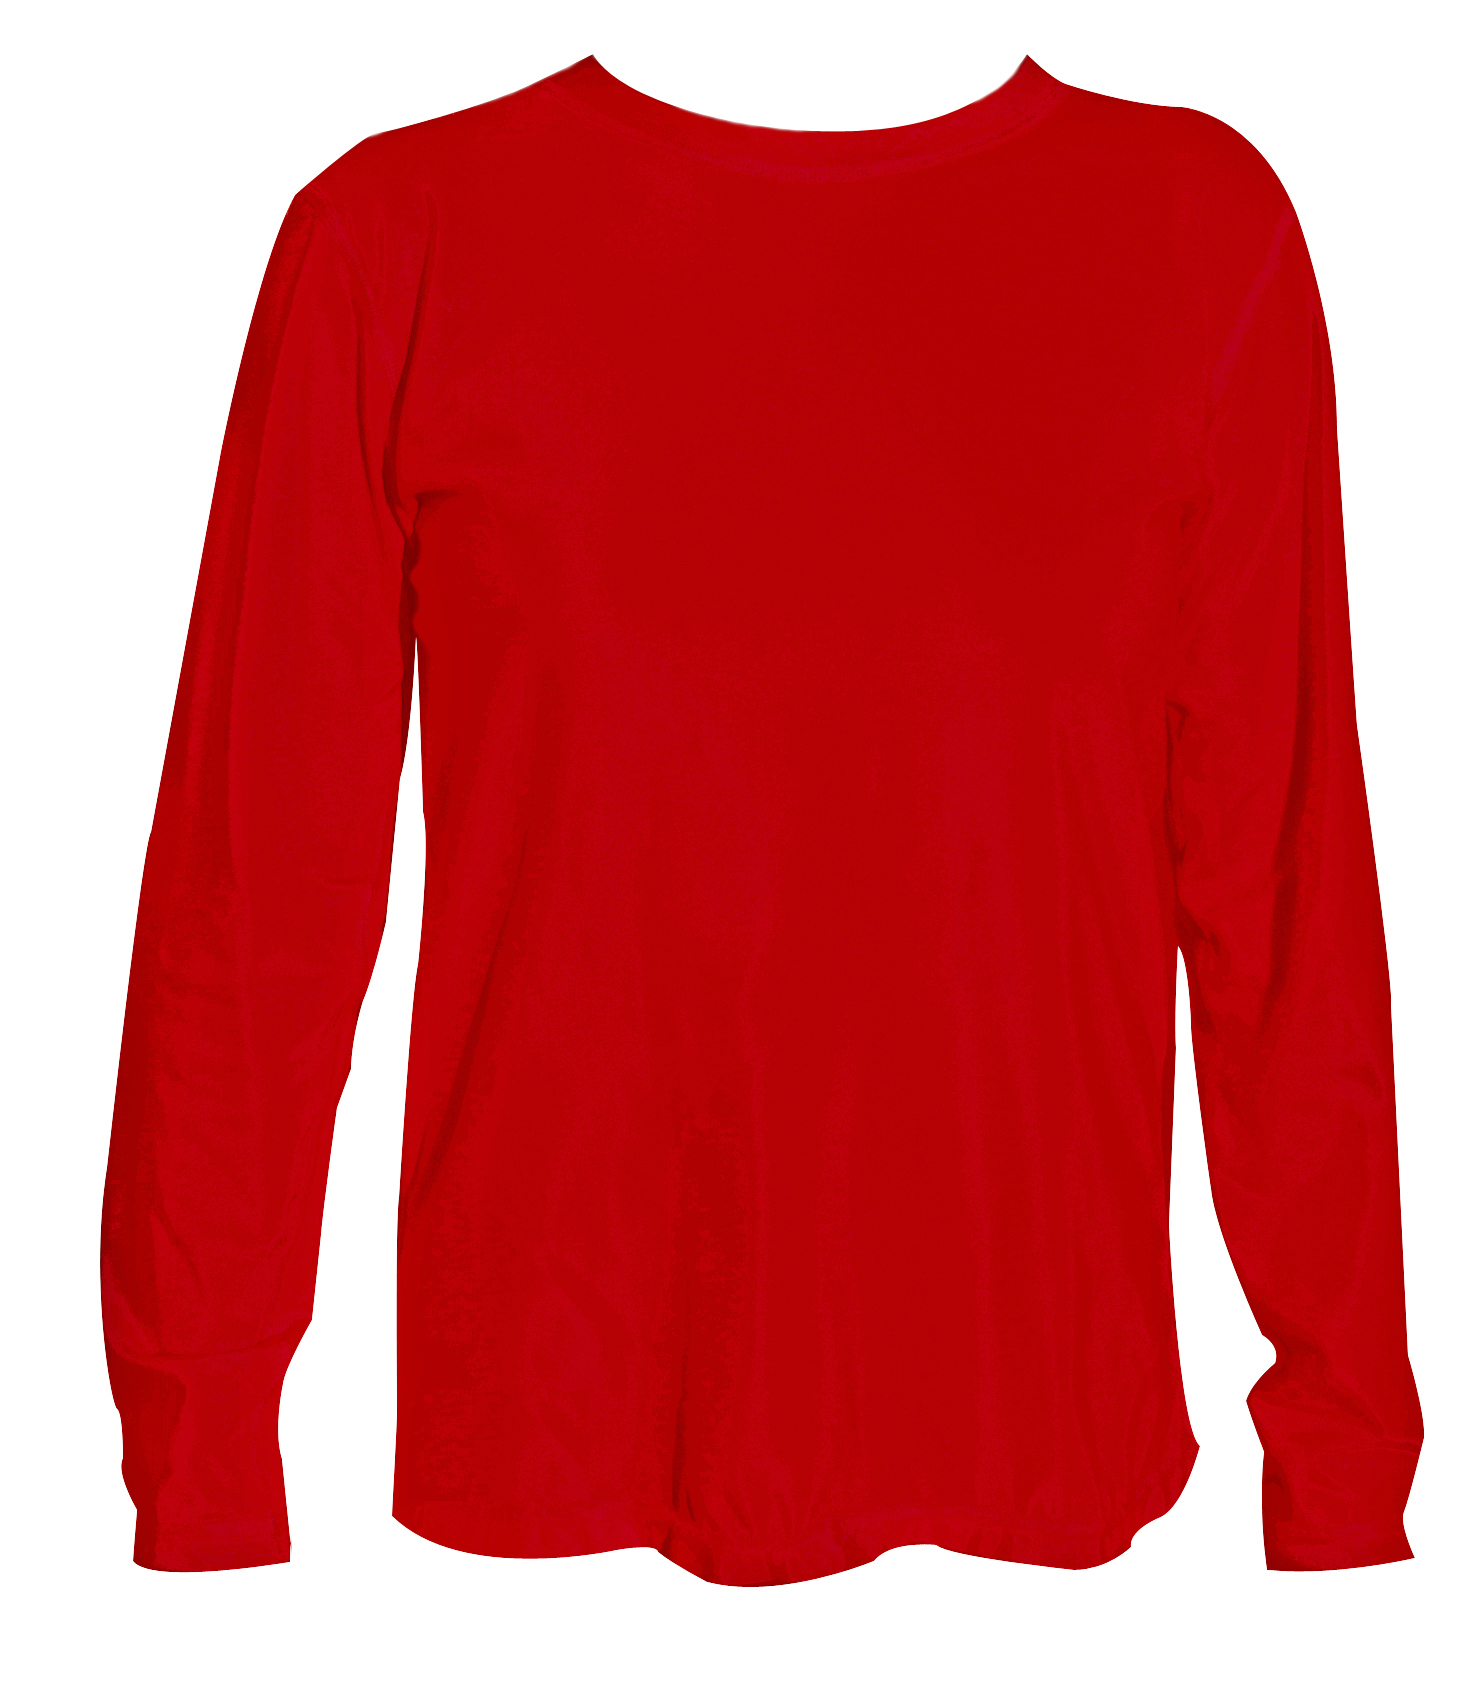 Back   Gallery For   Red Long Sleeve Shirt Clip Art